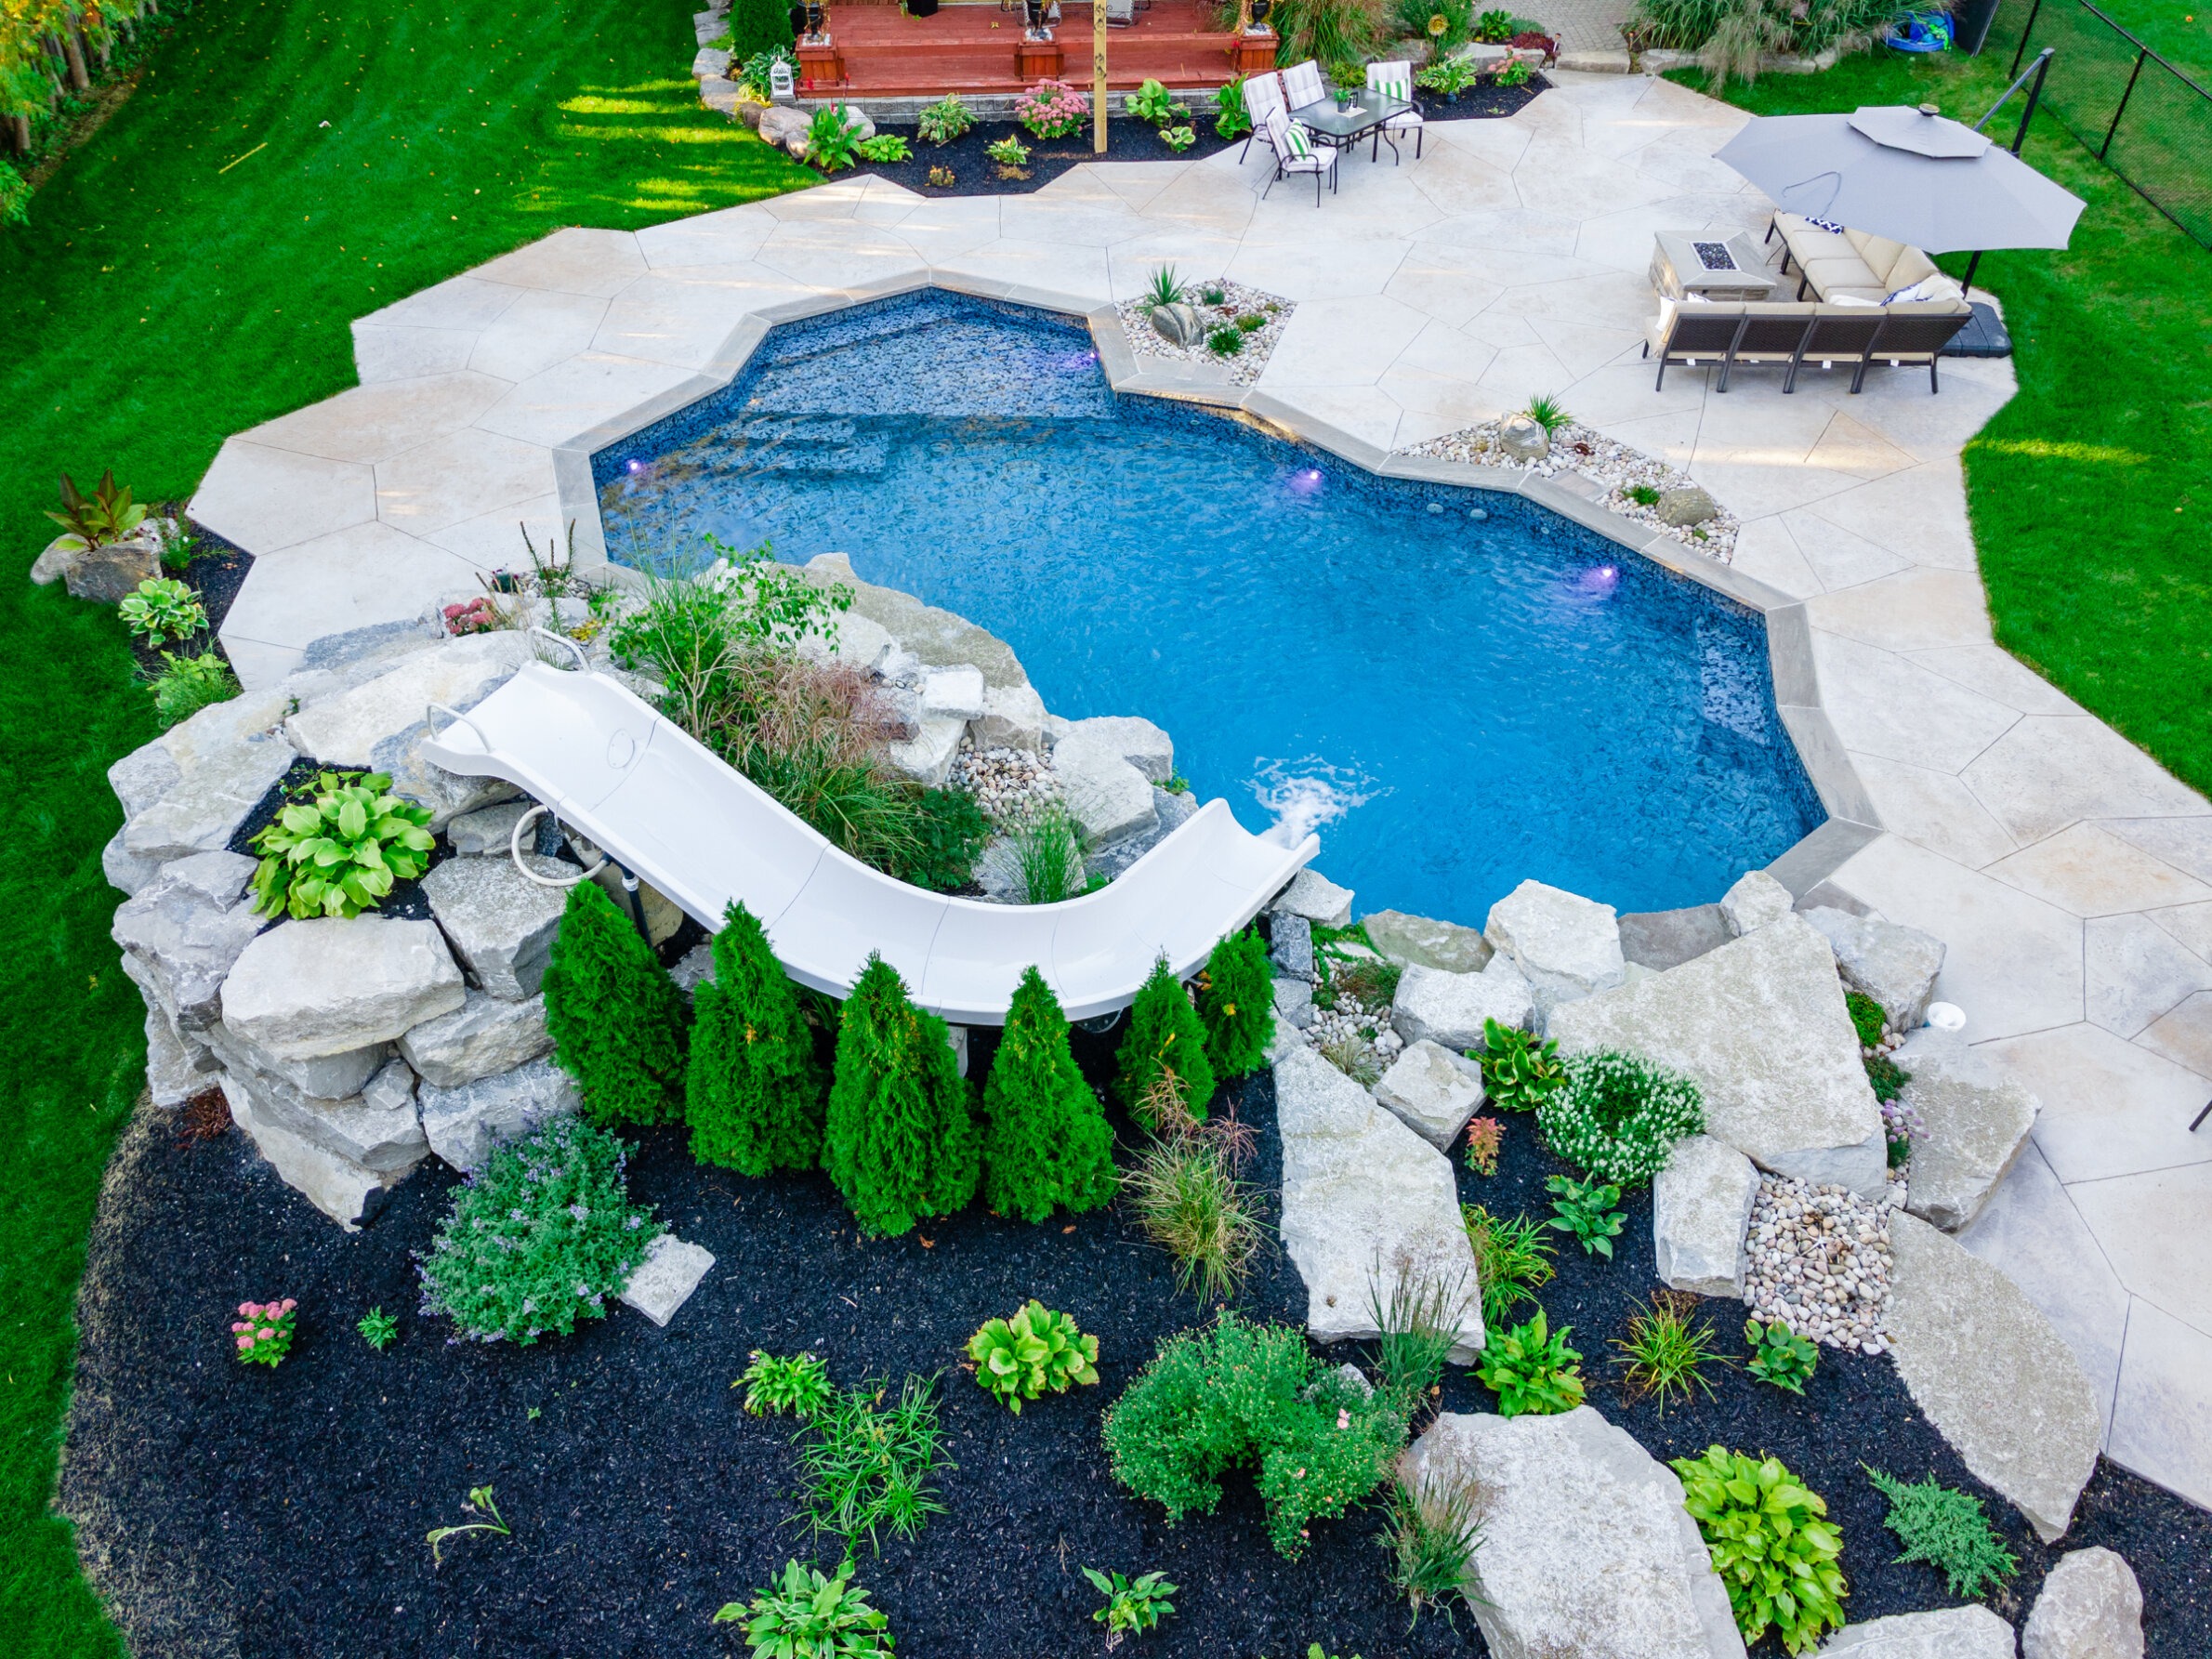 Aerial view of a landscaped backyard featuring an irregularly shaped swimming pool with slide, surrounded by stone patio, greenery, and outdoor furniture.